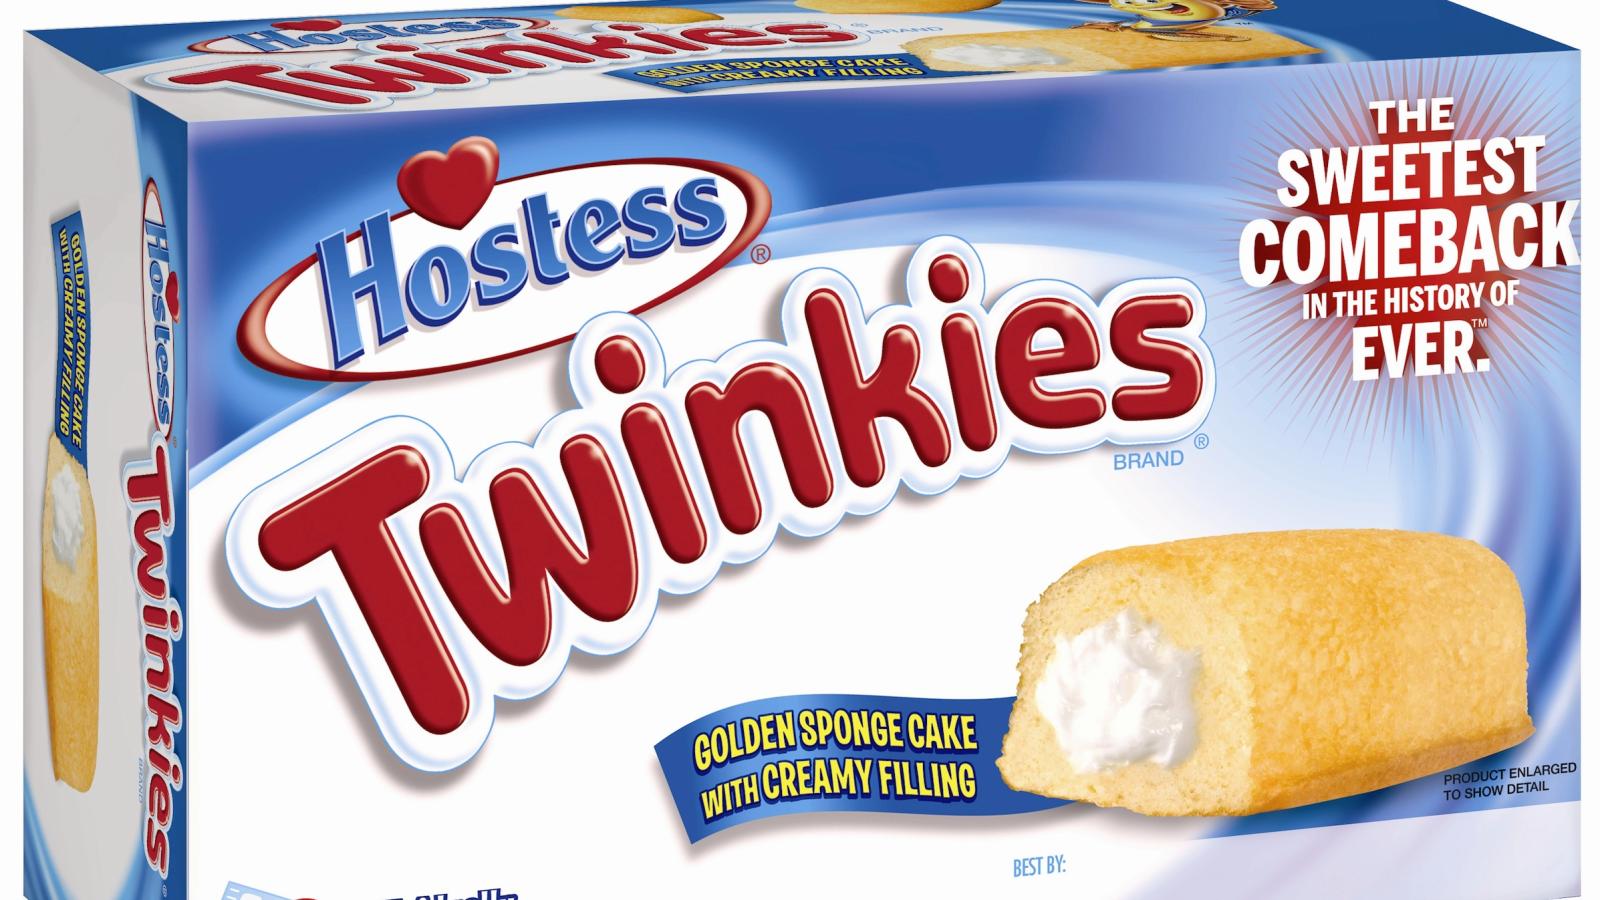 Business takeaways from the return of the Hostess Twinkie